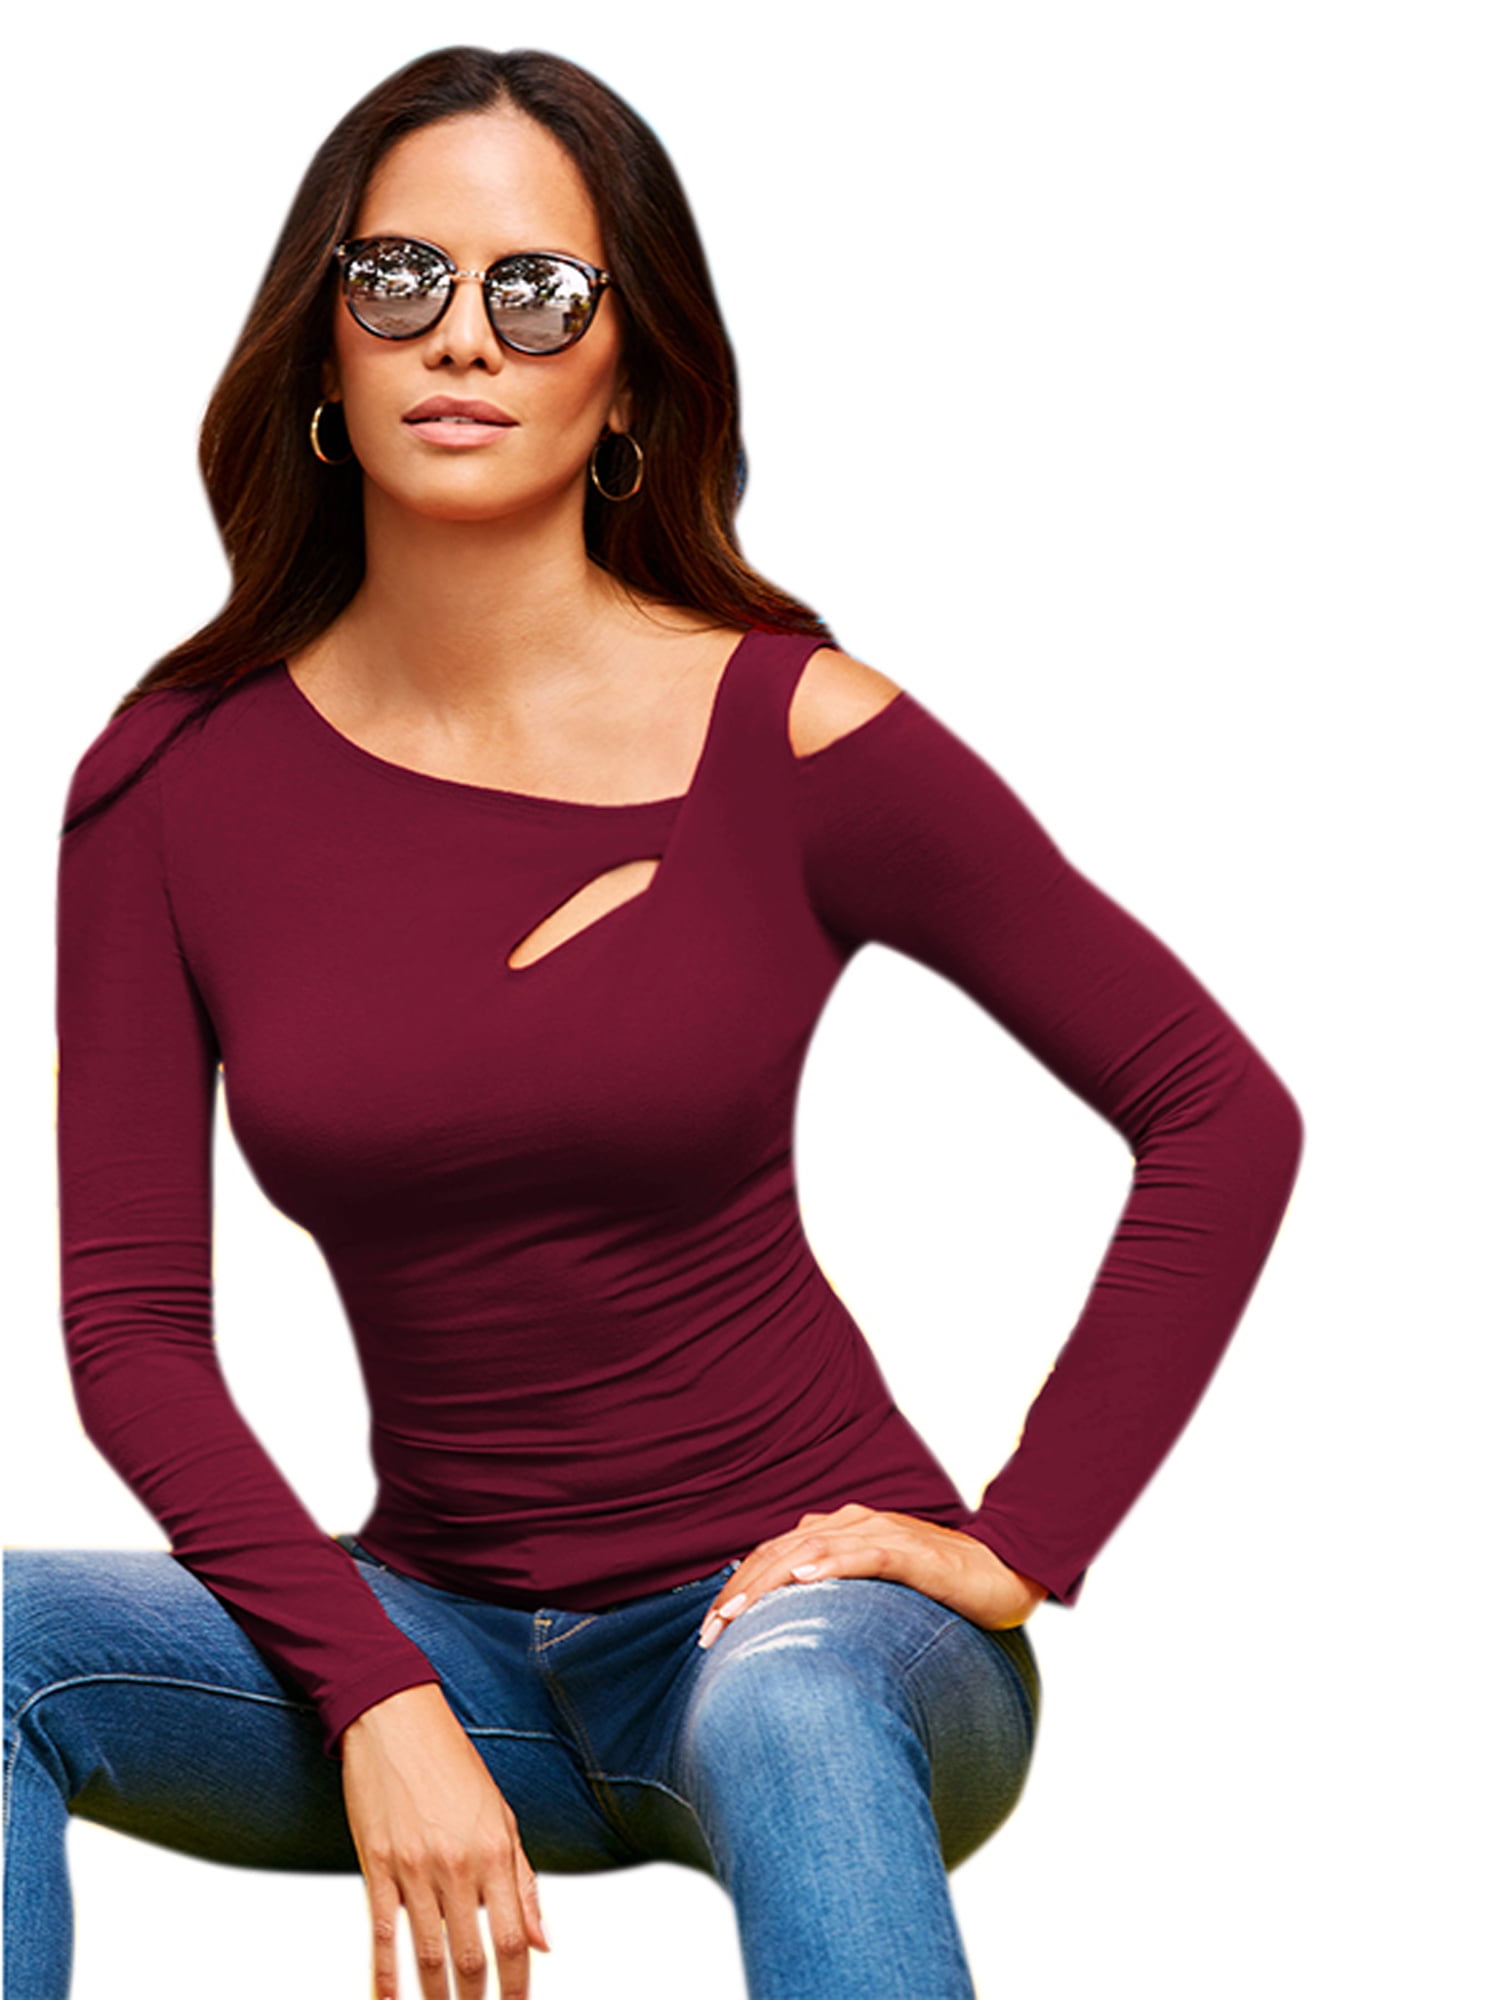 Lallc - Women's Cold Shoulder Tops Long Sleeve T Shirts Bodycon Skinny ...